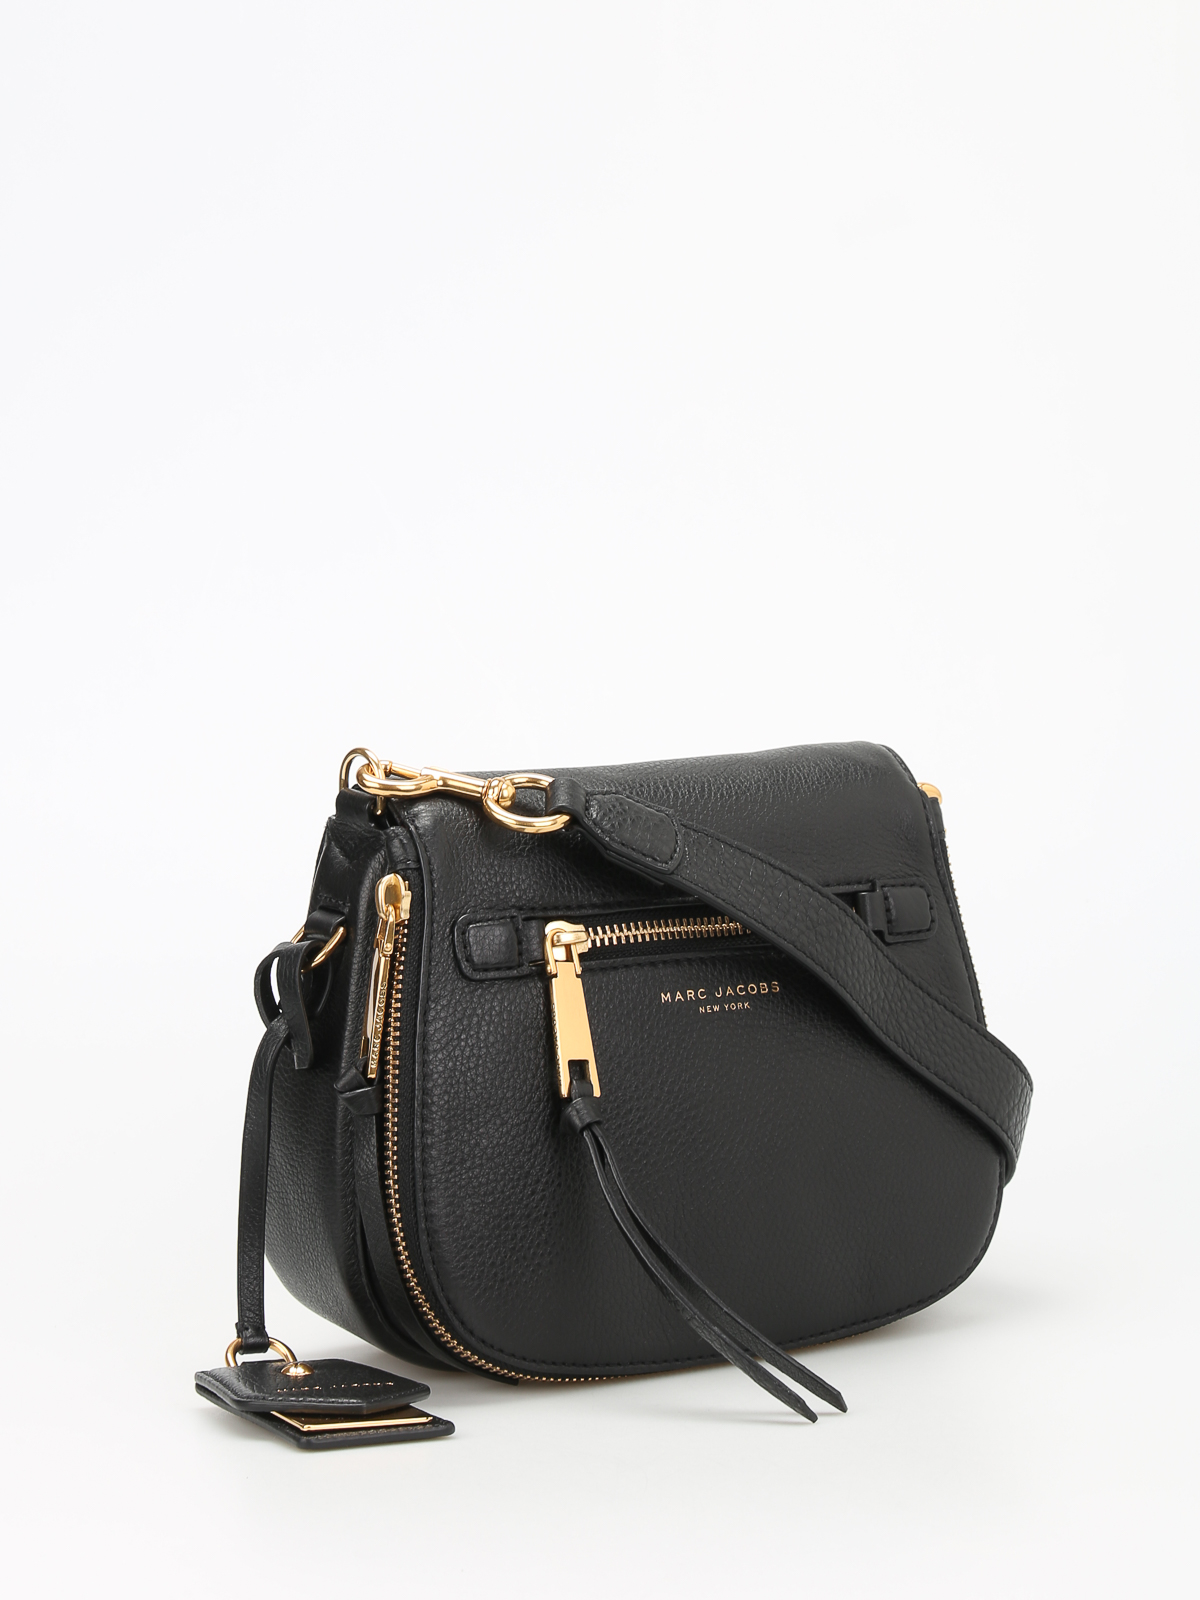 sac besace marc jacobs 5889eb